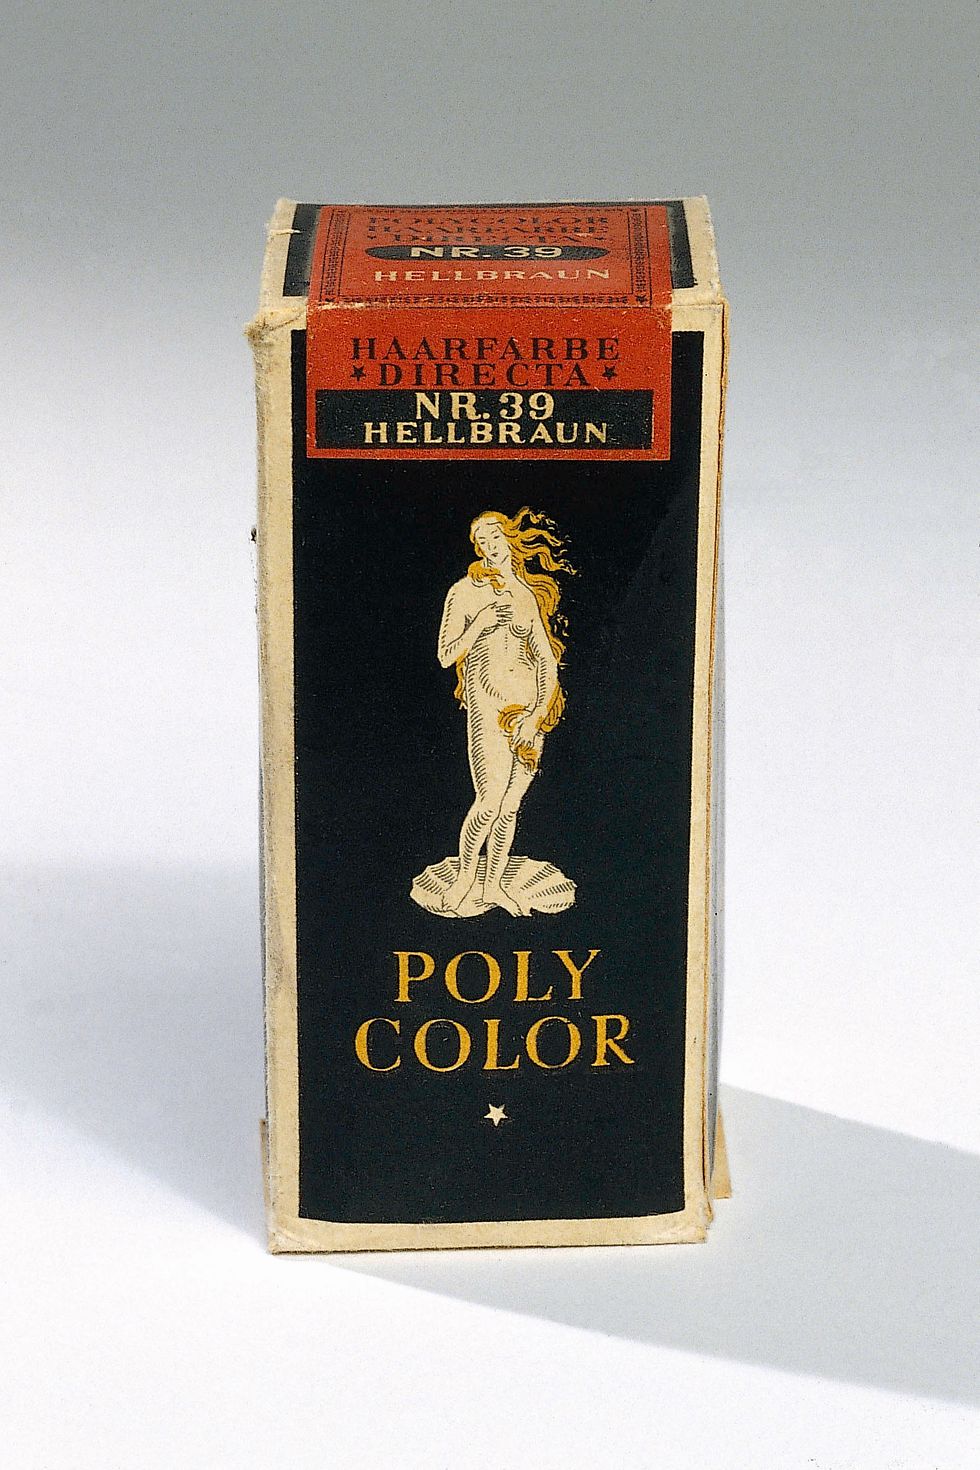 Historic poly color product packaging